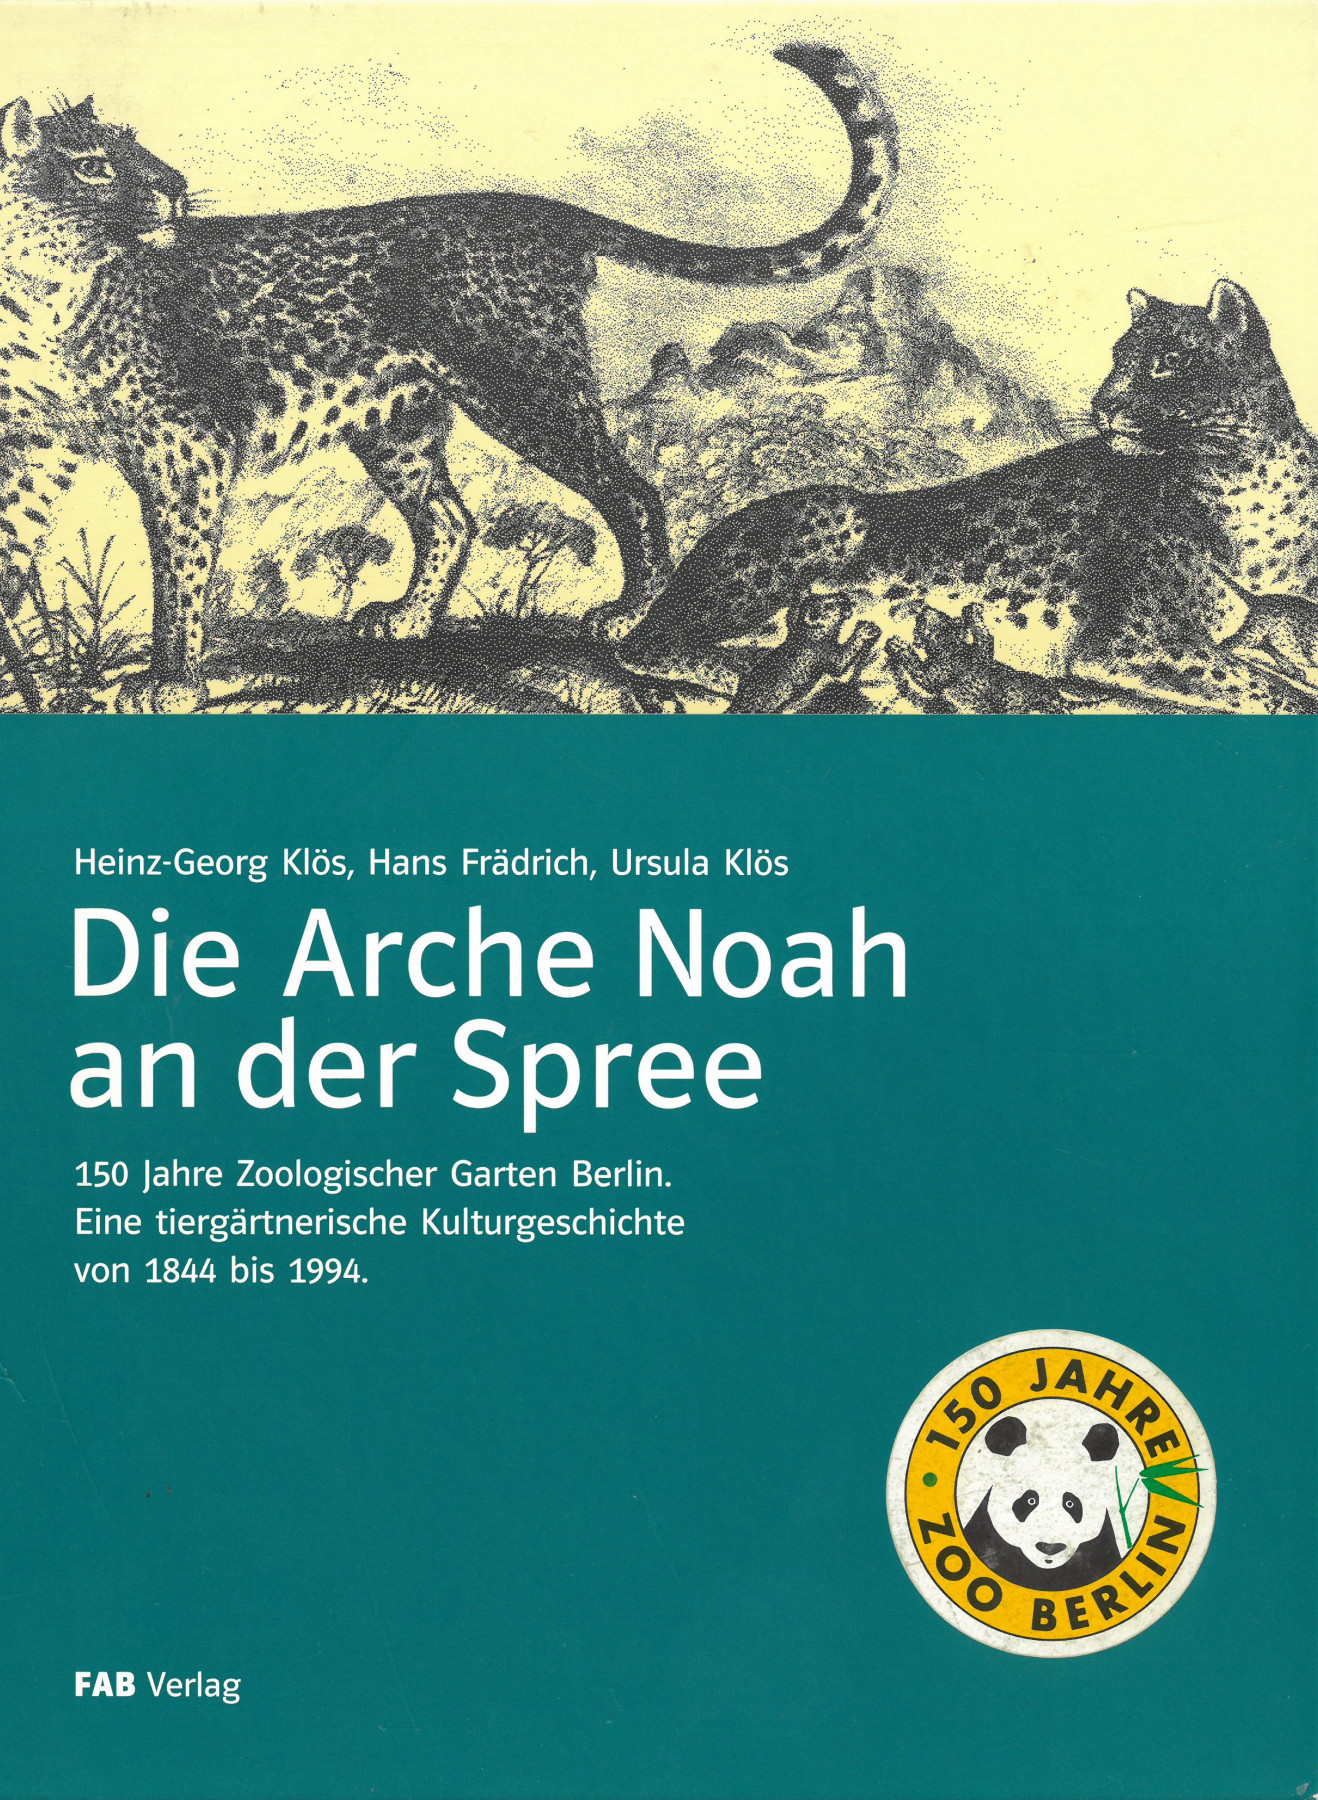 Book cover. The upper third is an illustration of two wildcats, one standing, one lying down. At the bottom right there is a round logo: the face of a panda with a bamboo branch surrounded by a yellow ring, which has “150 Years of Berlin Zoo” written on it.